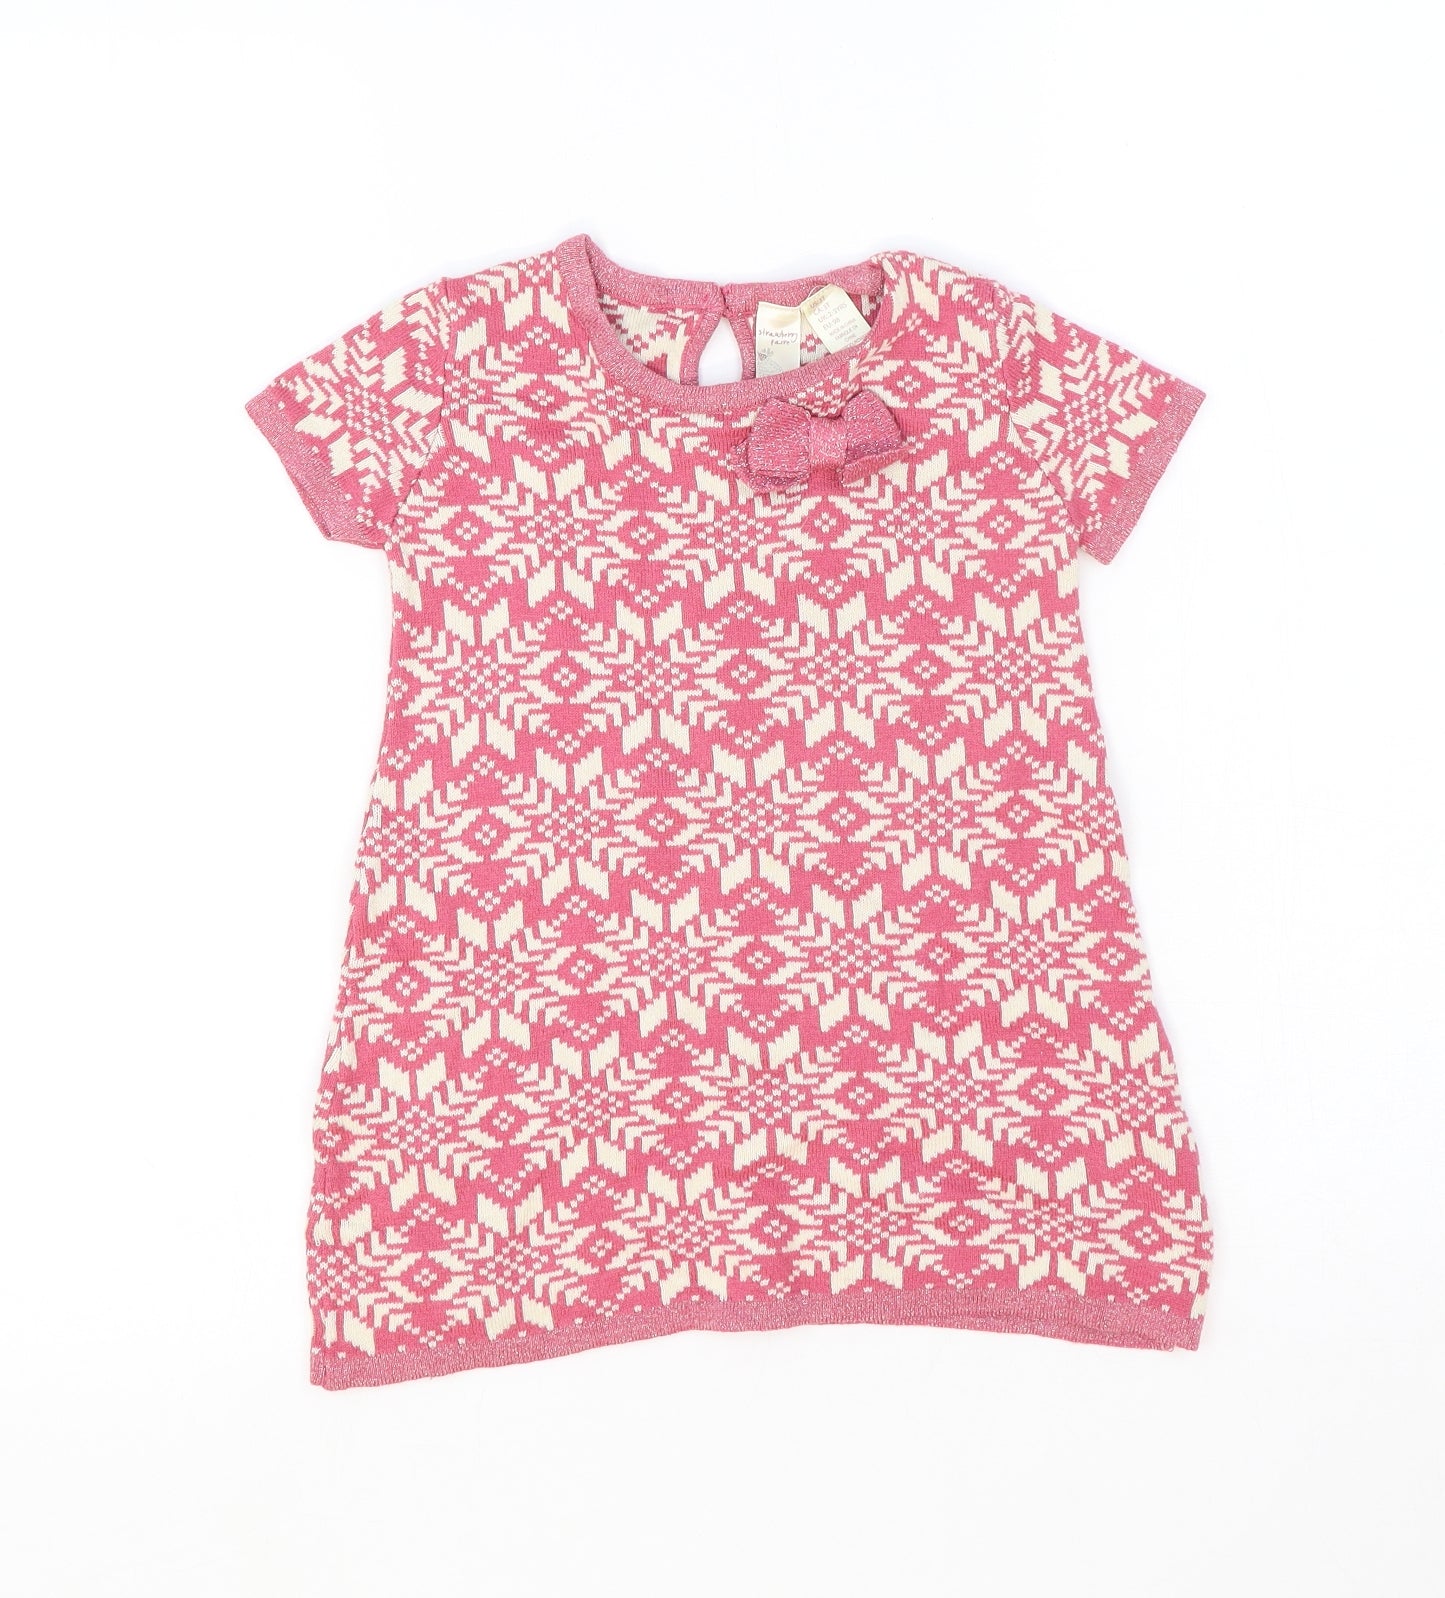 Strawberry Faire Girls Pink Geometric Cotton Jumper Dress Size 2-3 Years Round Neck Pullover